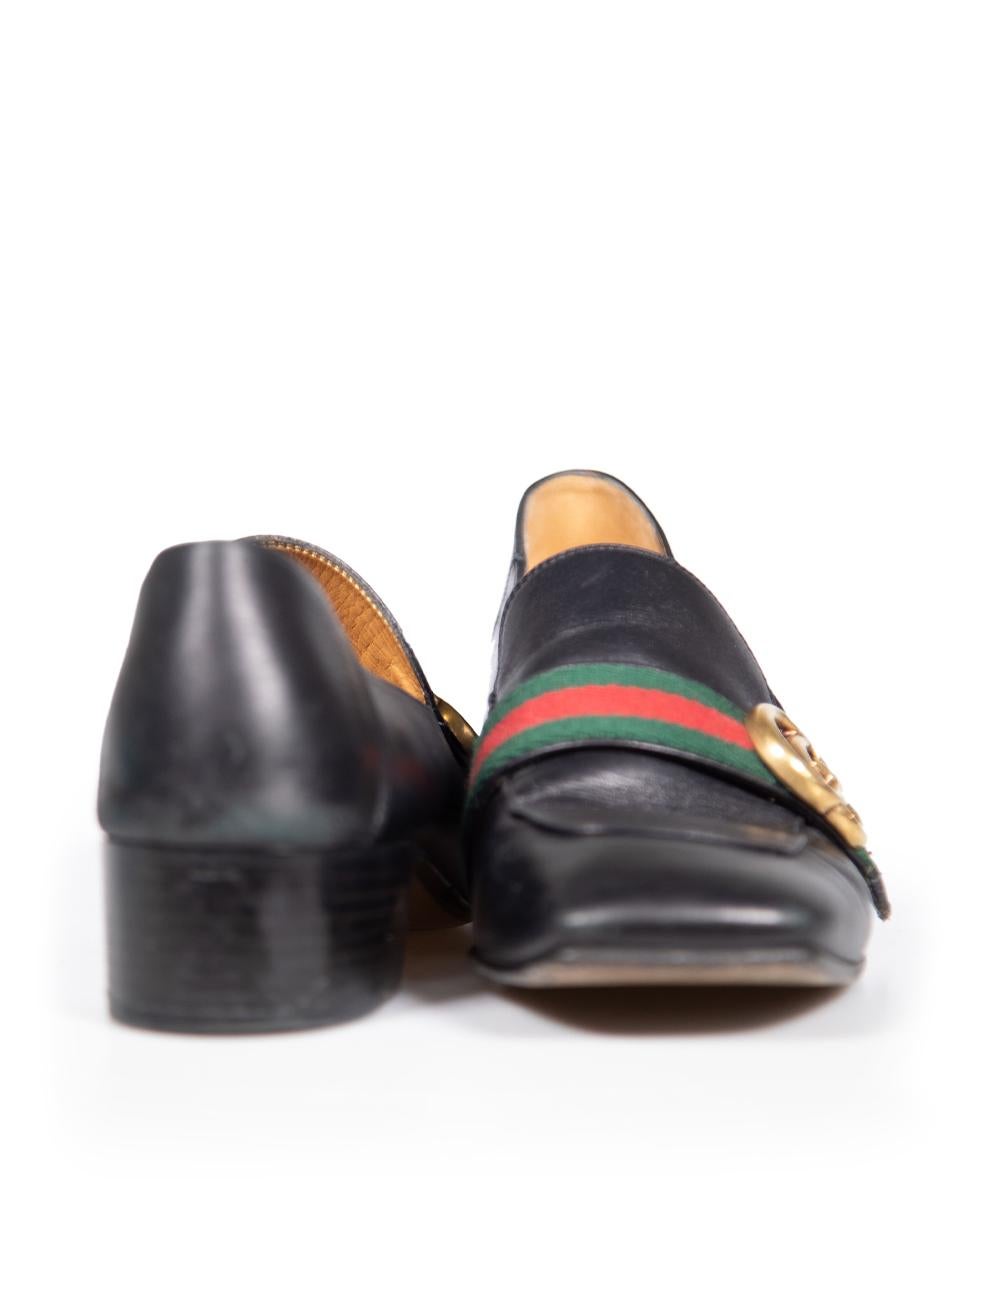 Gucci Black Leather Peyton GG Web Loafers Size IT 39.5 In Excellent Condition For Sale In London, GB